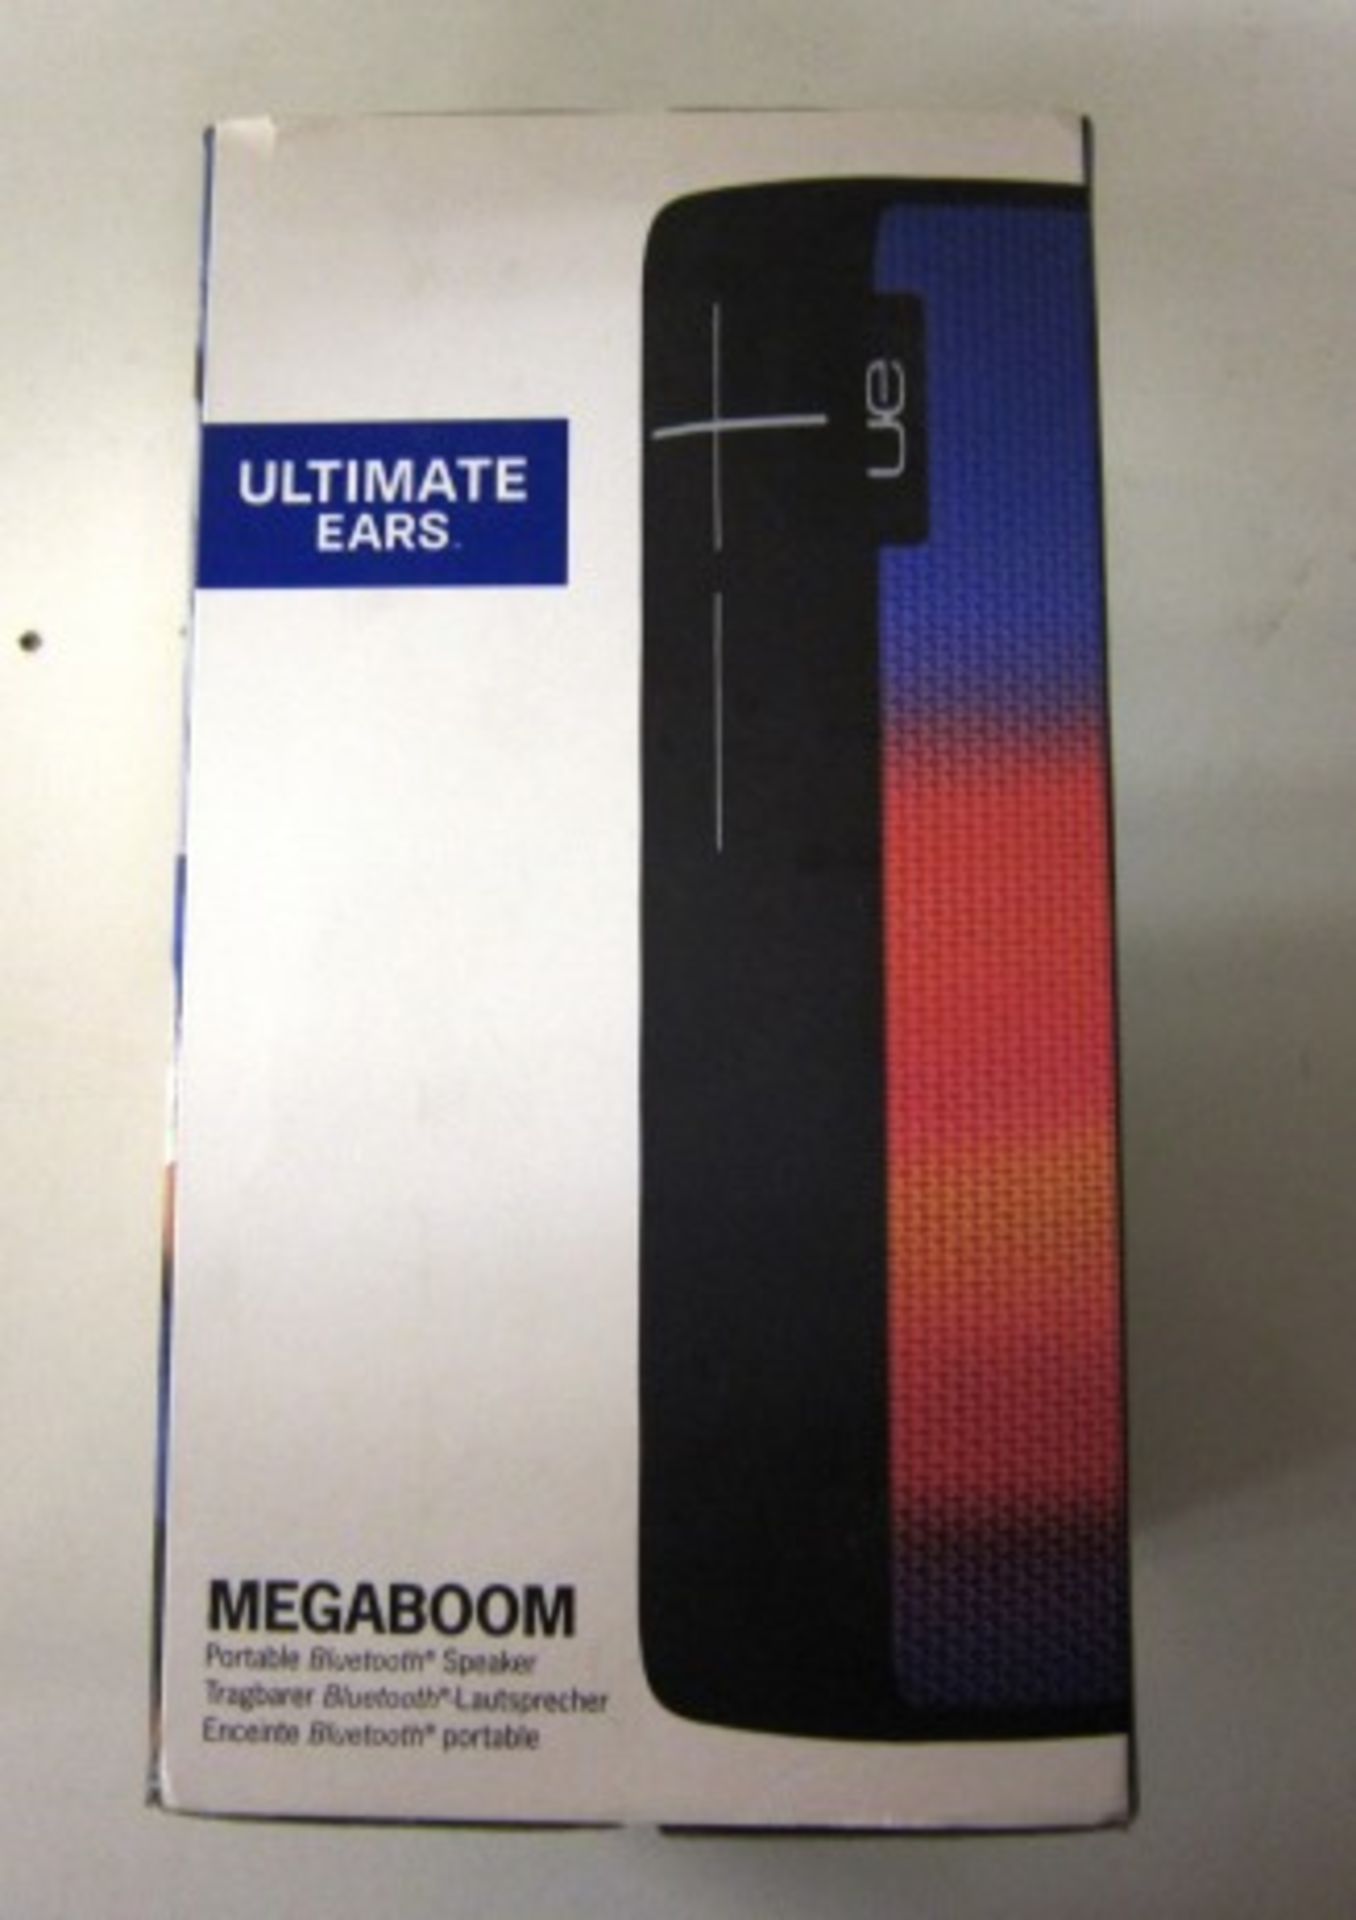 UE Megaboom portable bluetooth speaker in radiance apple custom colours. Will not charge to enable